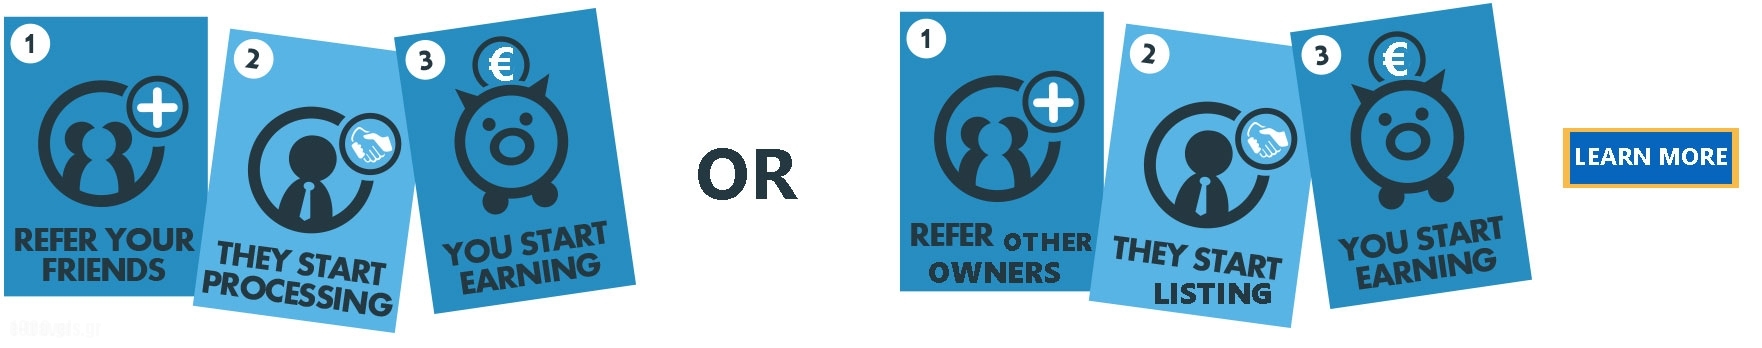 Refer friends-get rewarded,Greek Tourist Guide and Directory,e-travels.gr